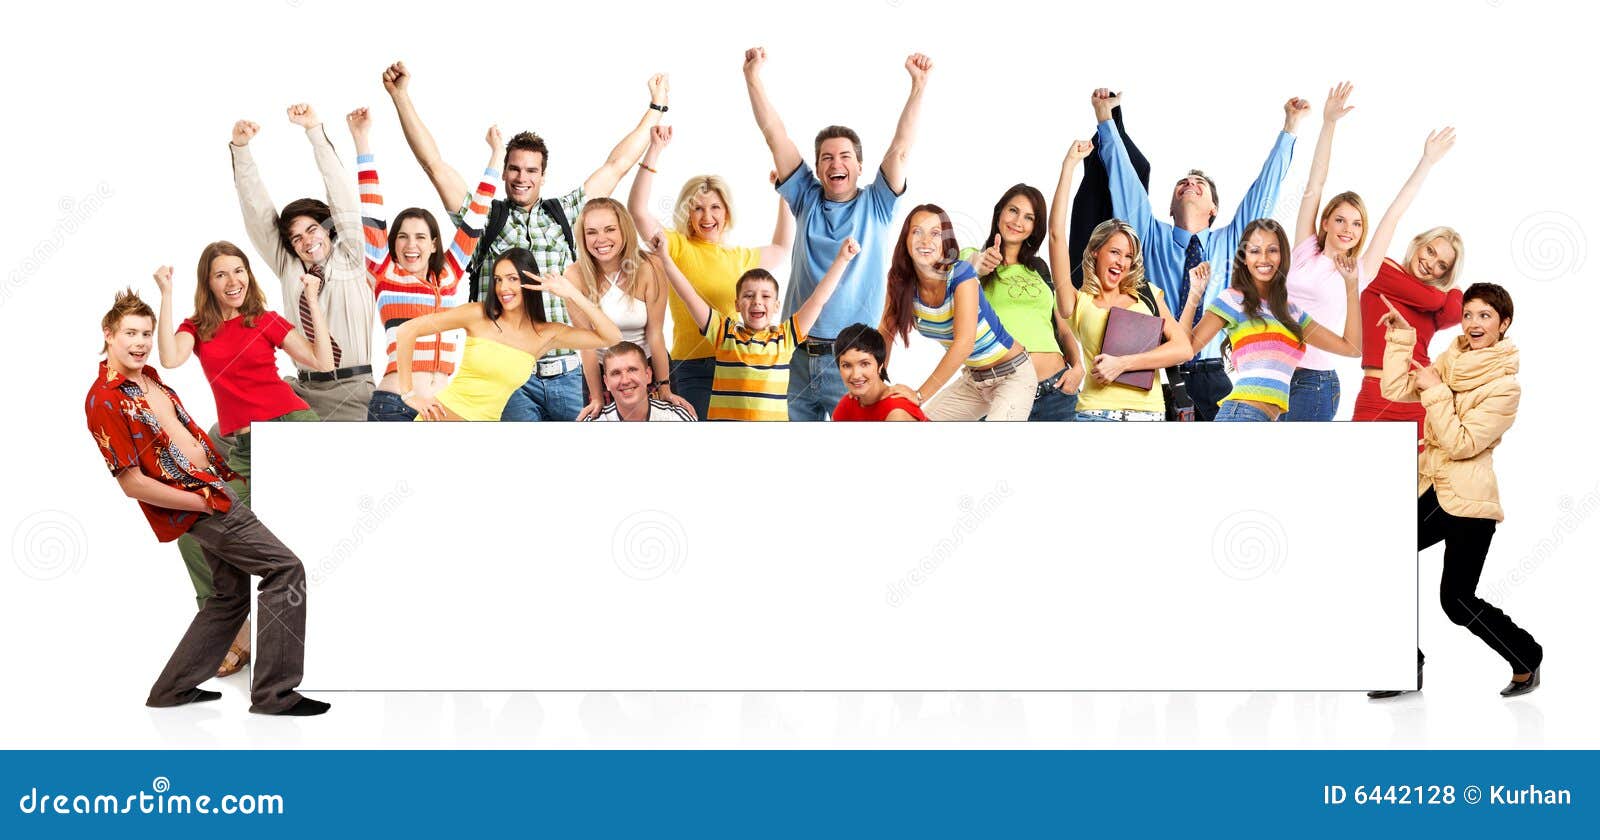 Happy funny people stock photo. Image of funny, crazy - 6442128